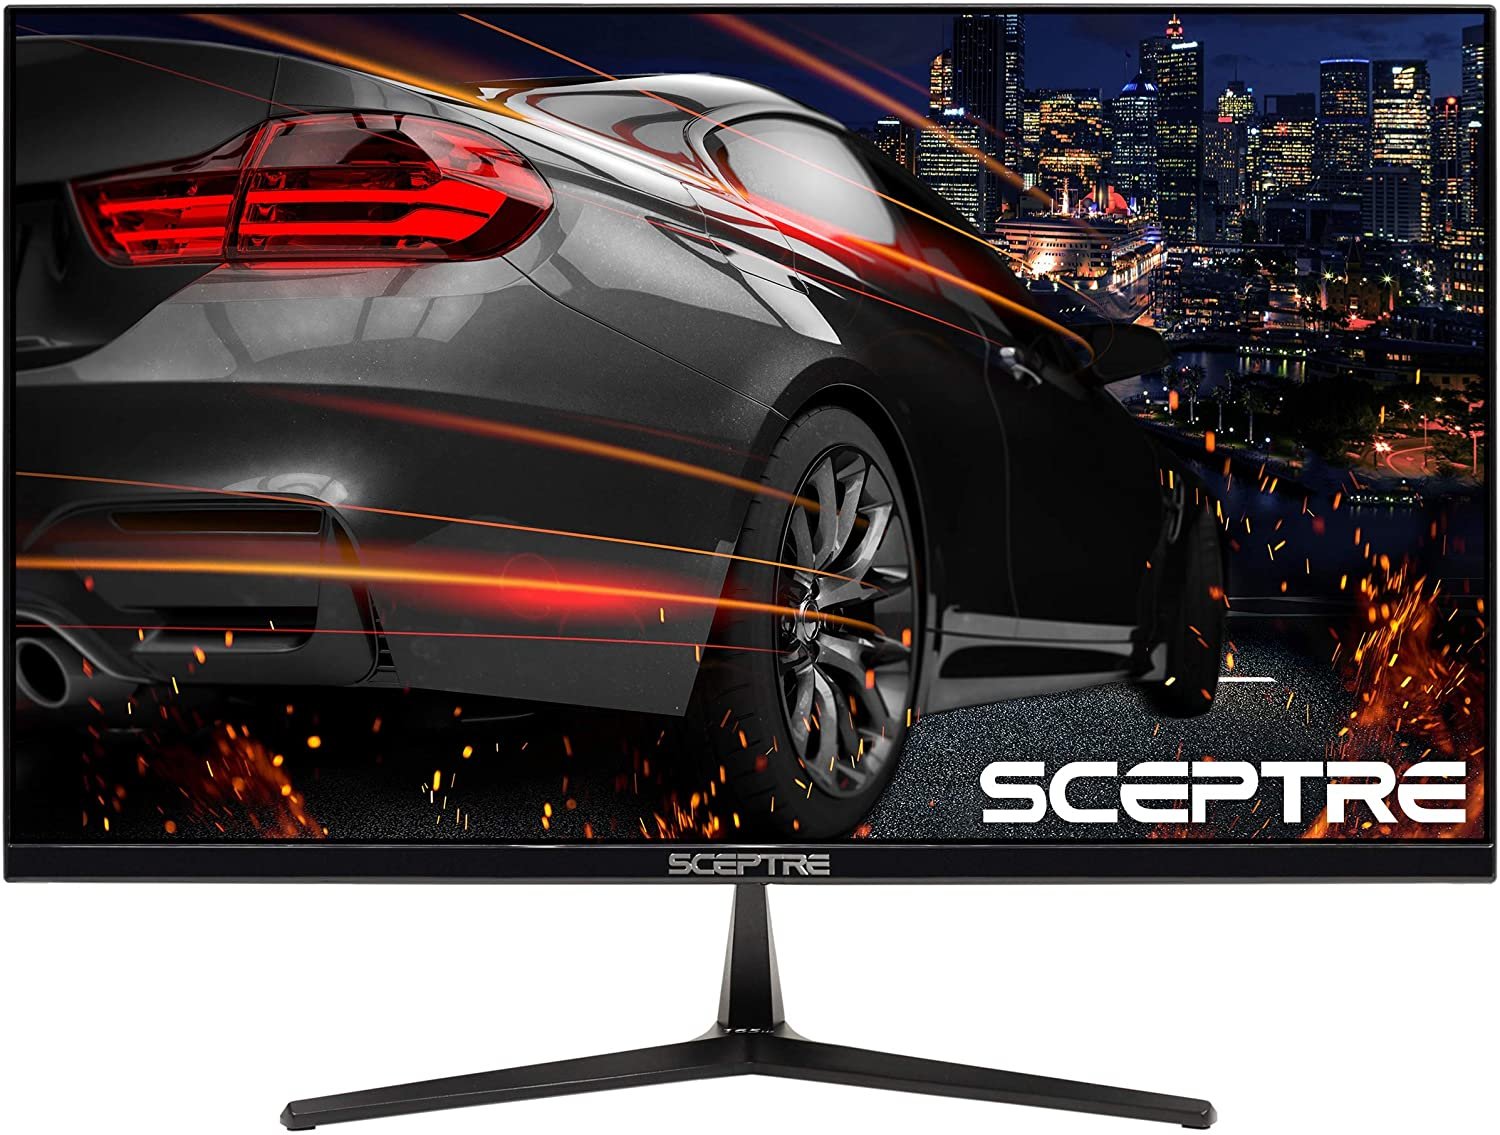 Sceptre Monitor Review